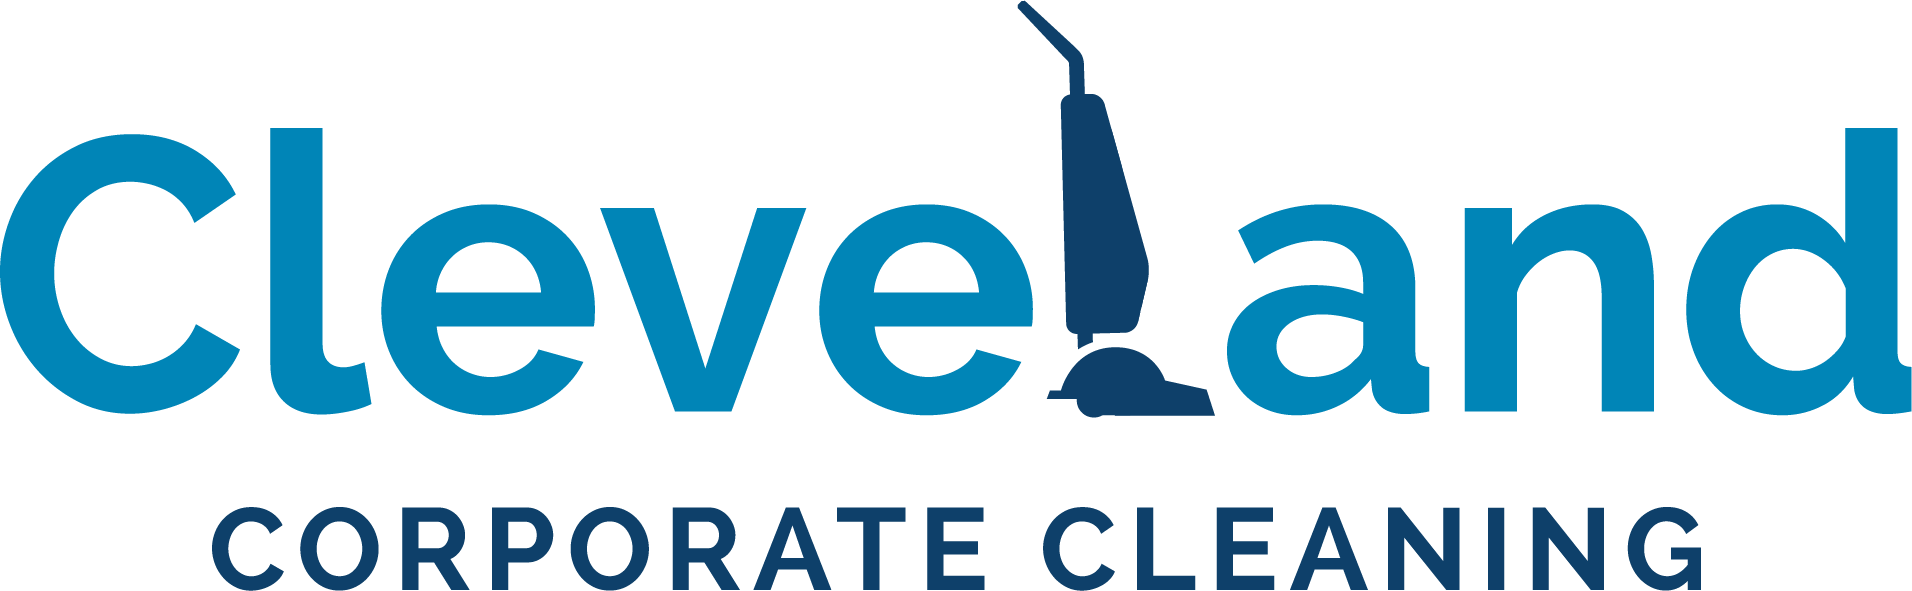 Cleveland Corporate Cleaning